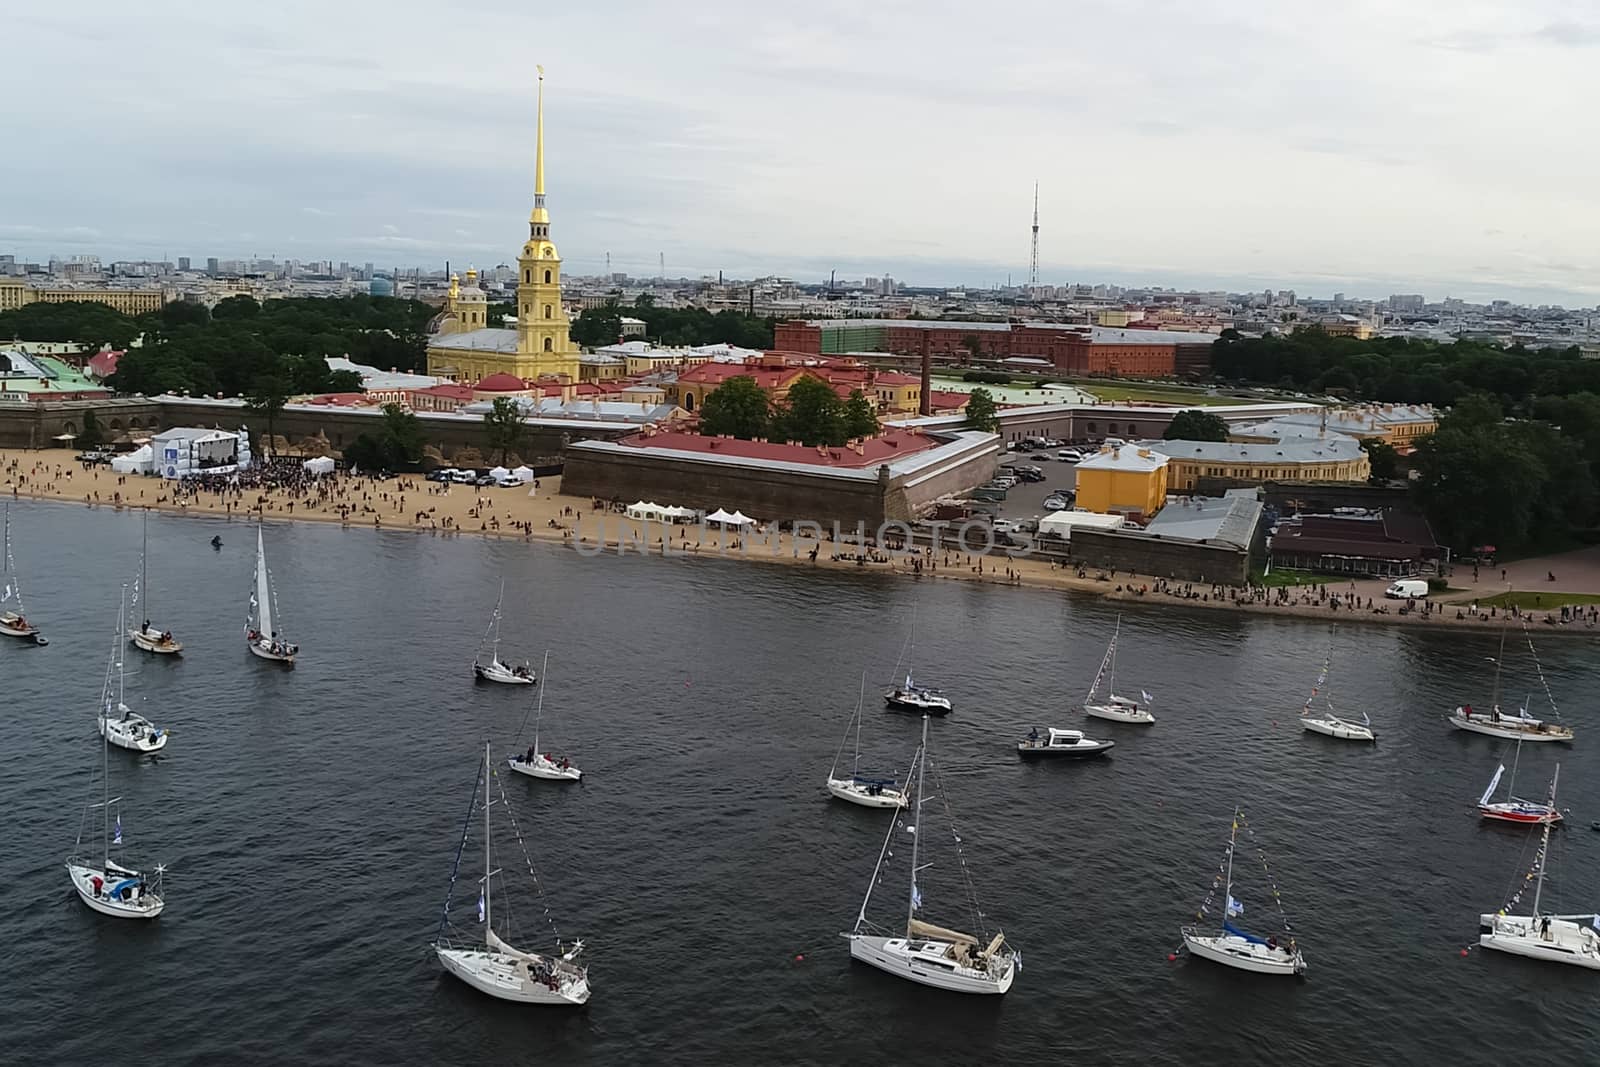 Festival of yachts in St. Petersburg on the river neve. Sailing by nyrok